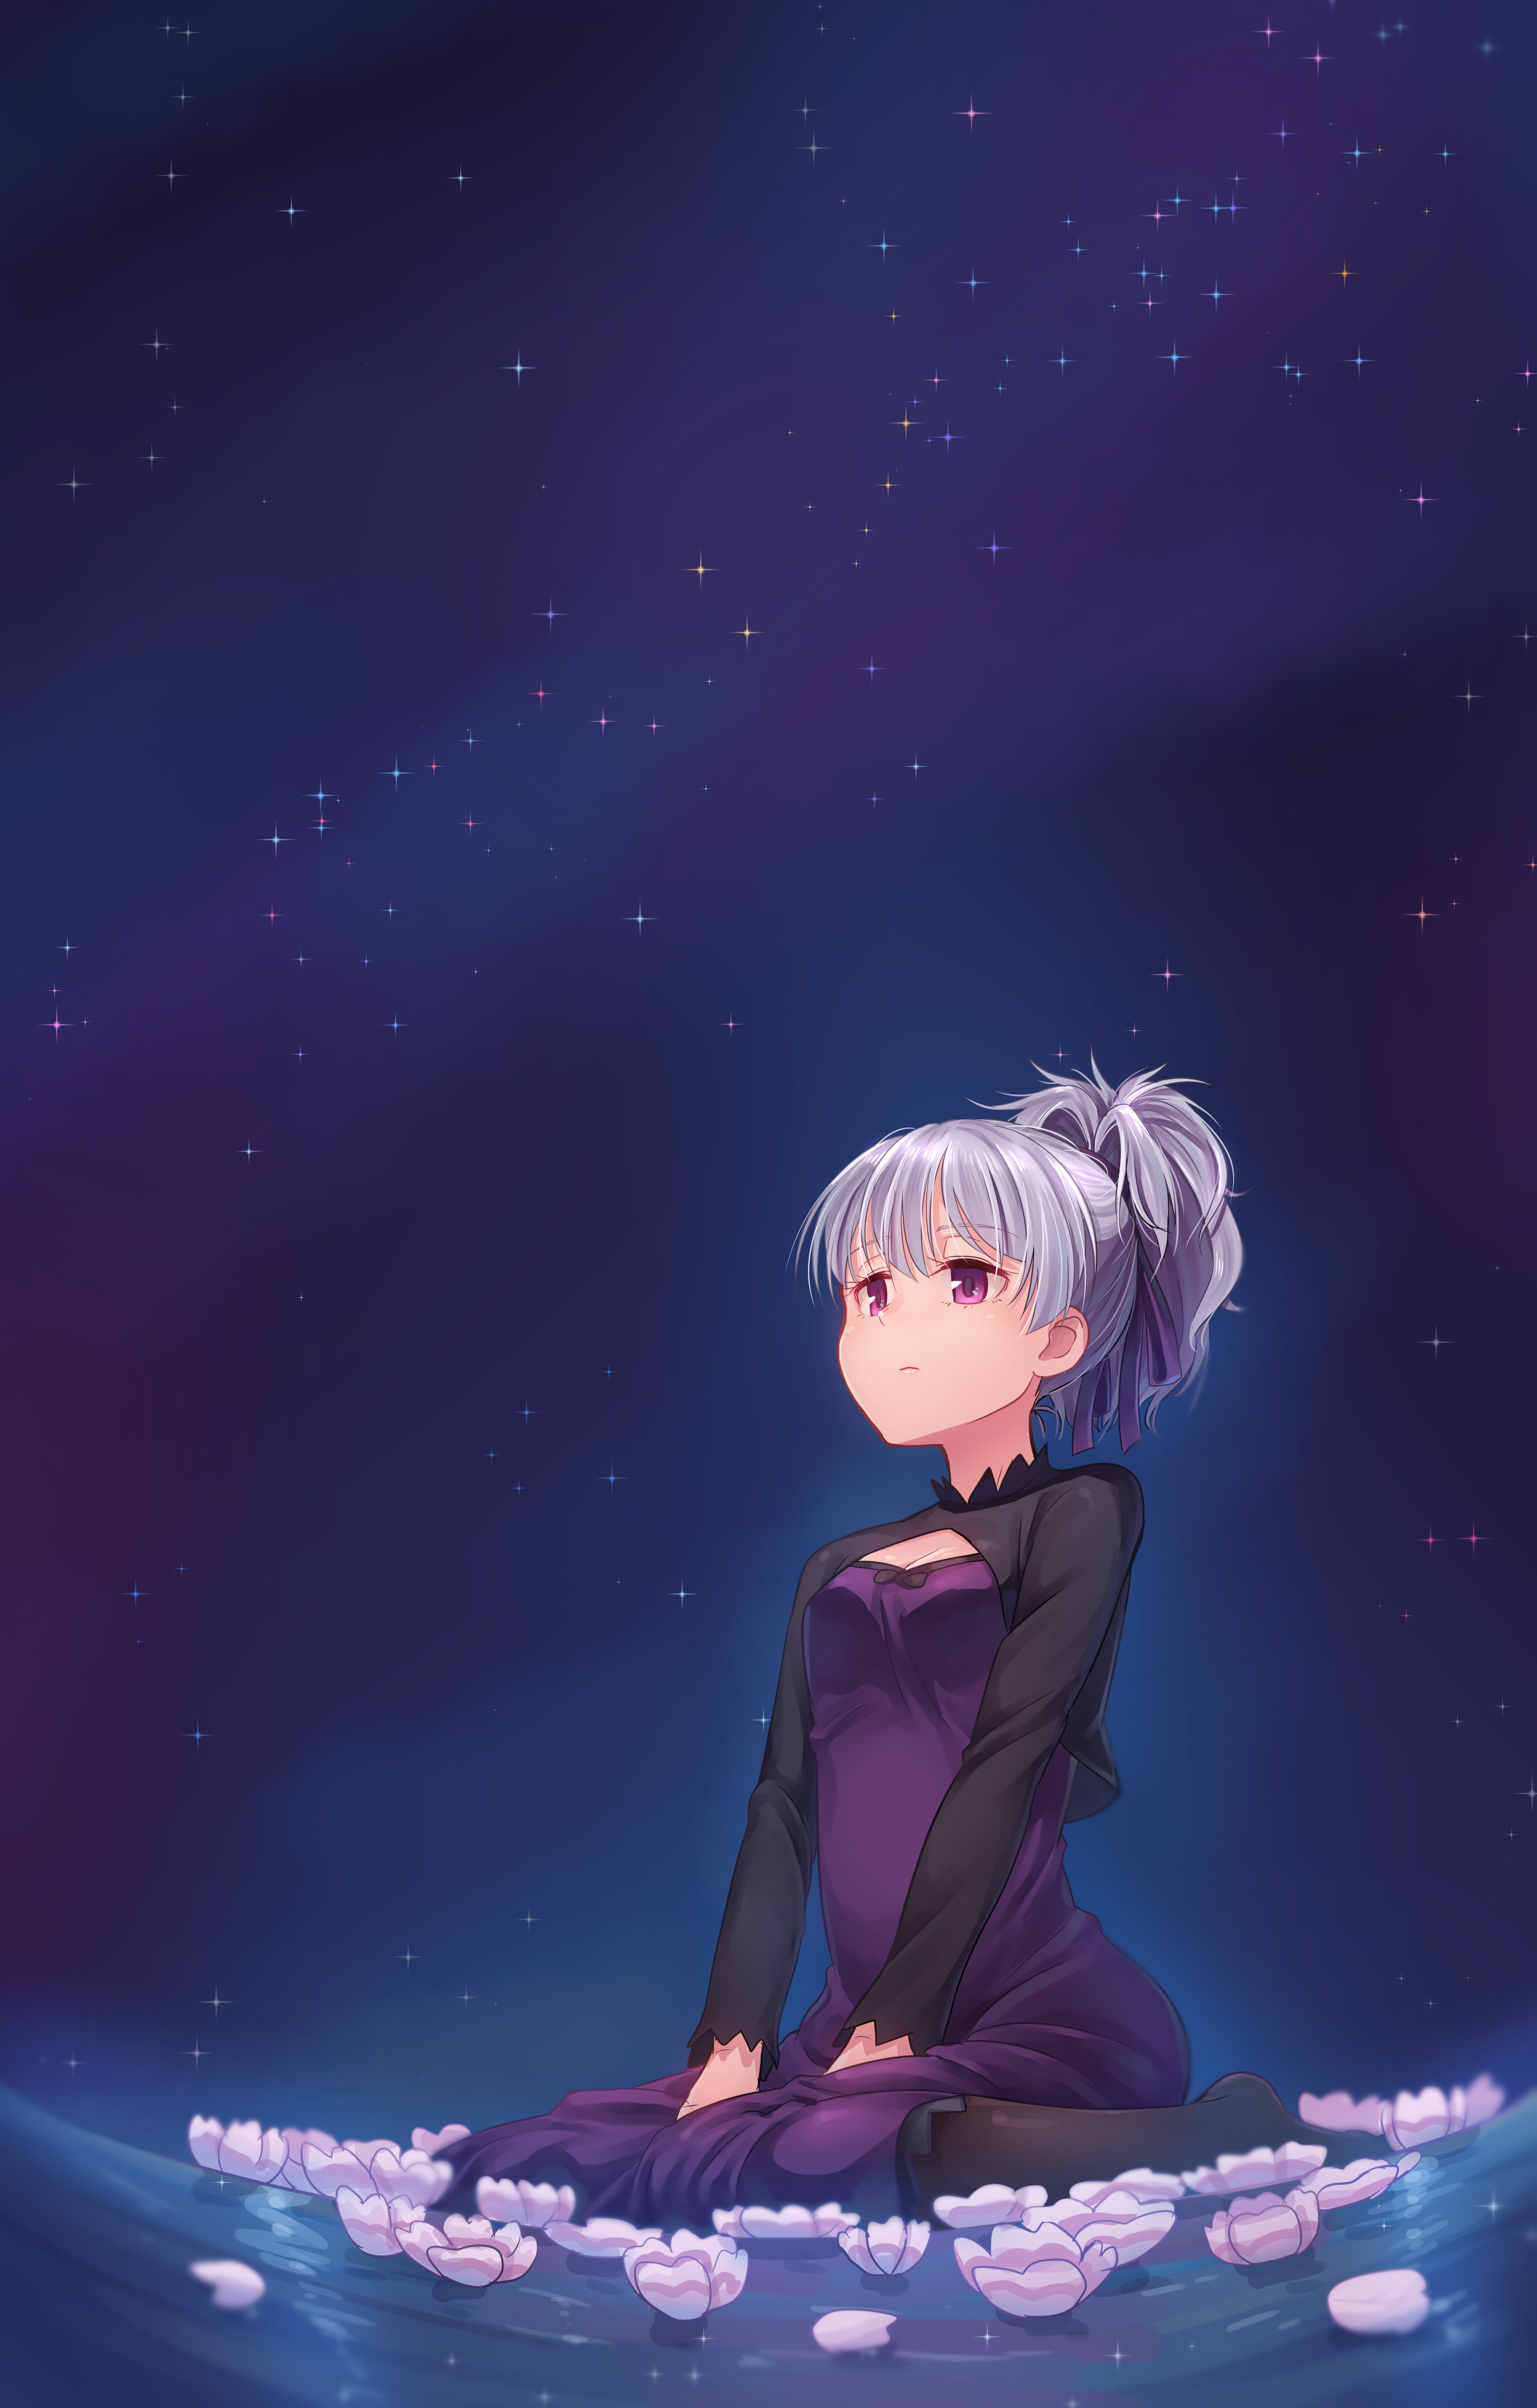 Darker than Black, anime girls, Yin, one person, young adult